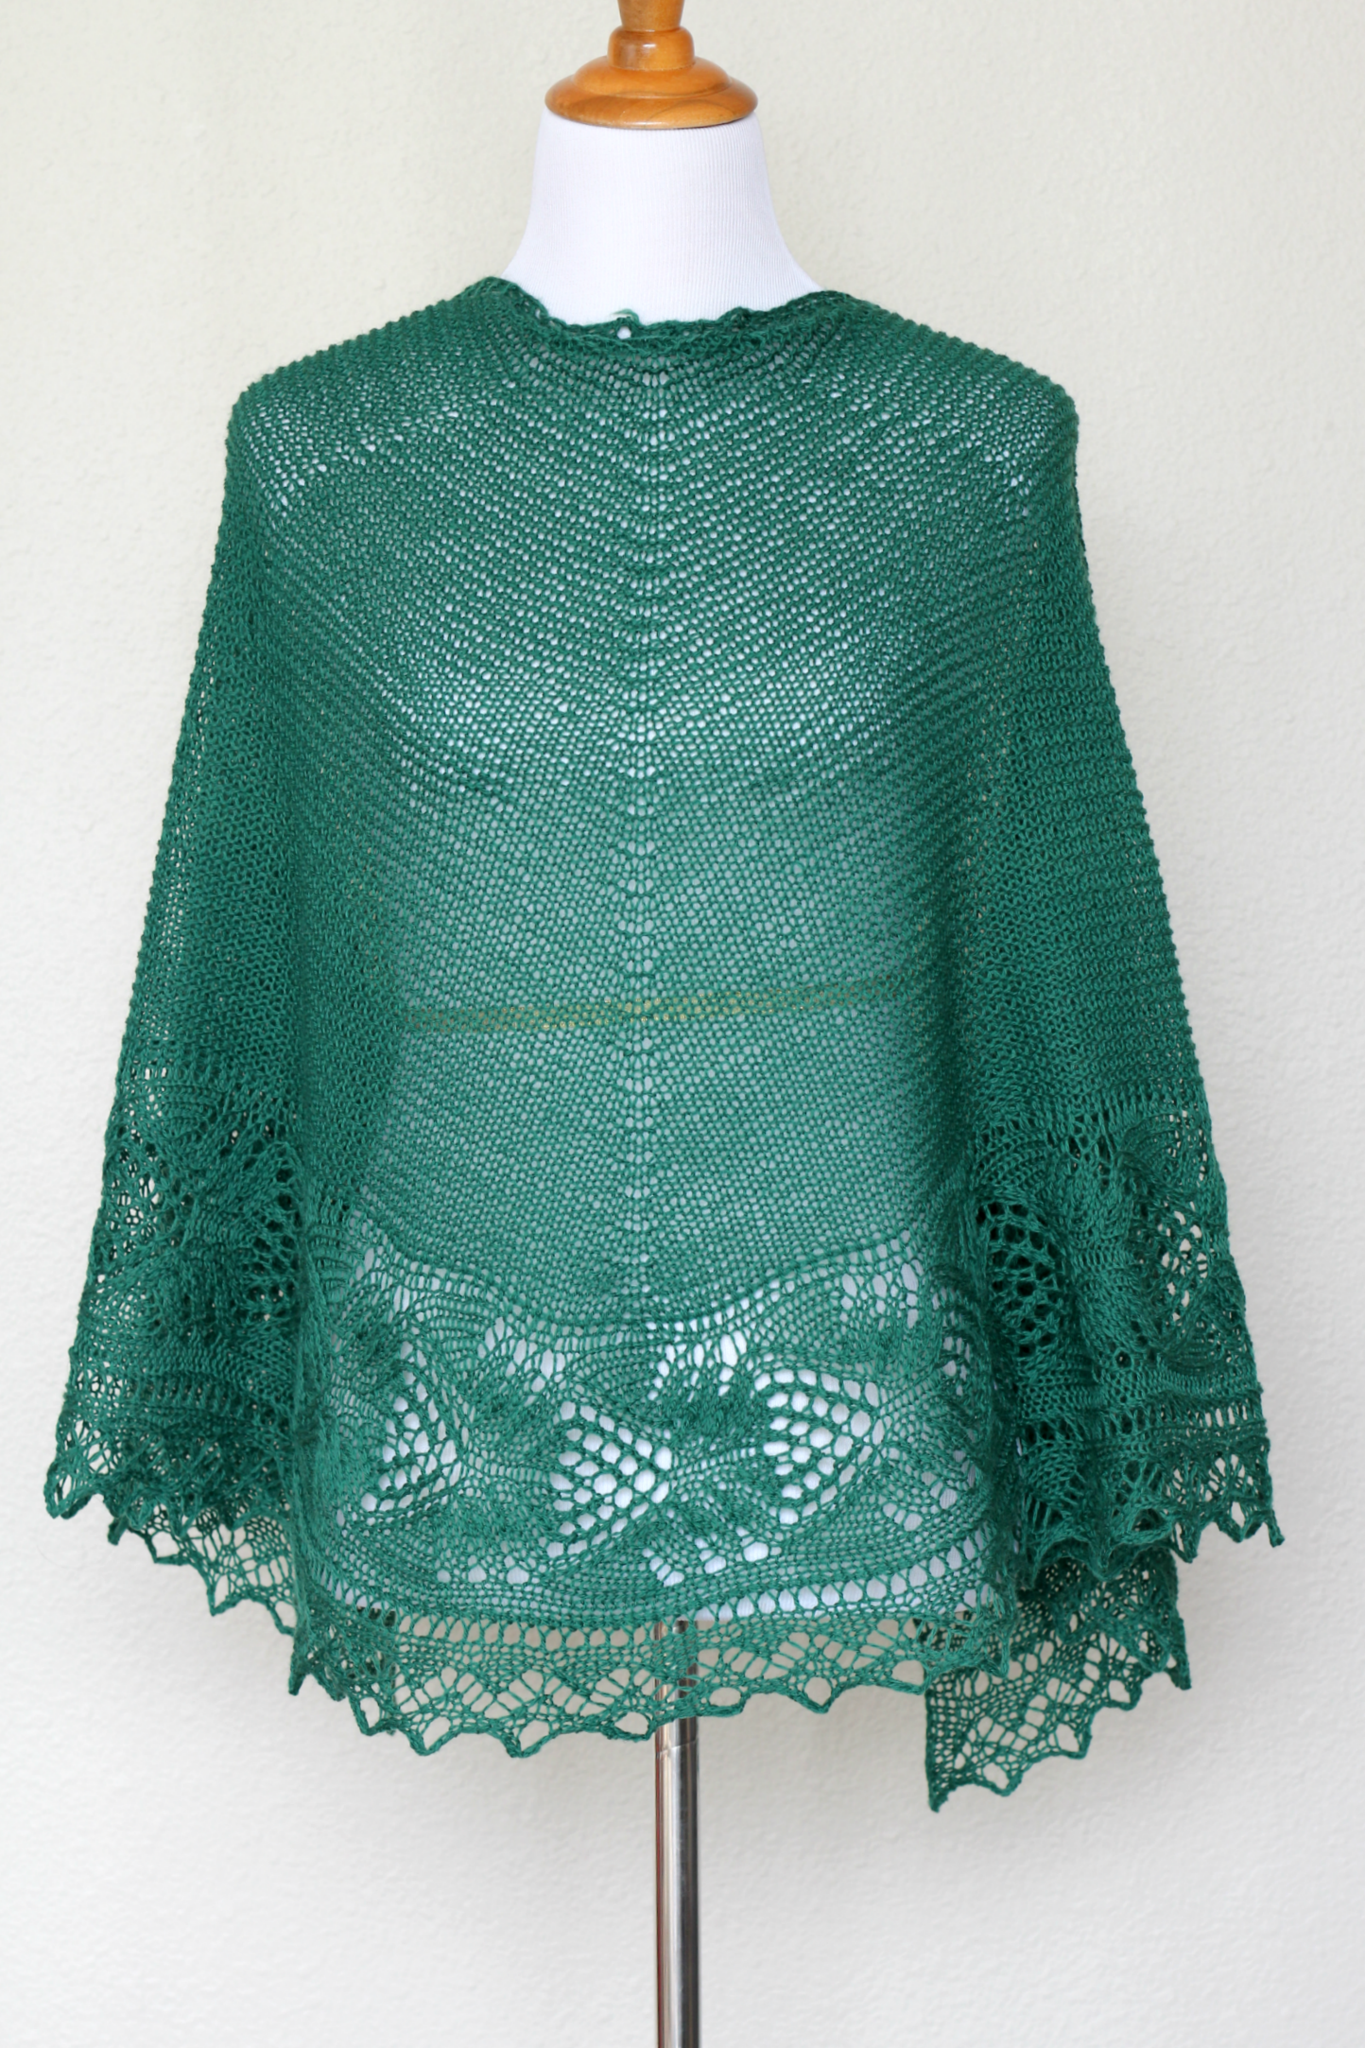 Knit shawl with laced border in forest green color